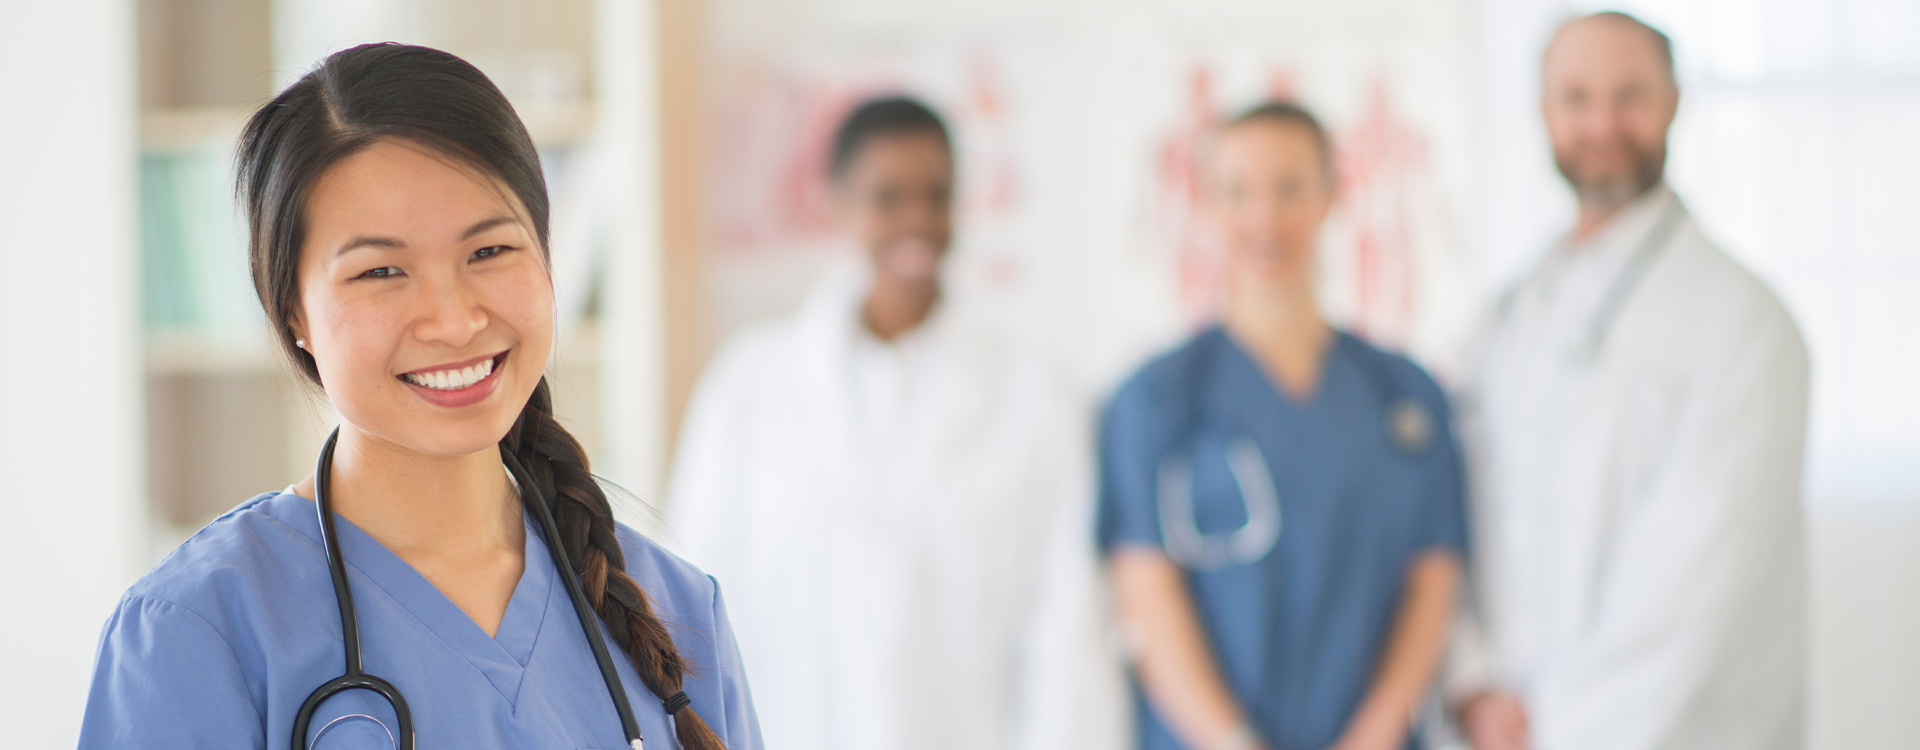 young doctor in blue scrubs smiling, group of medical professionals behind her smiling